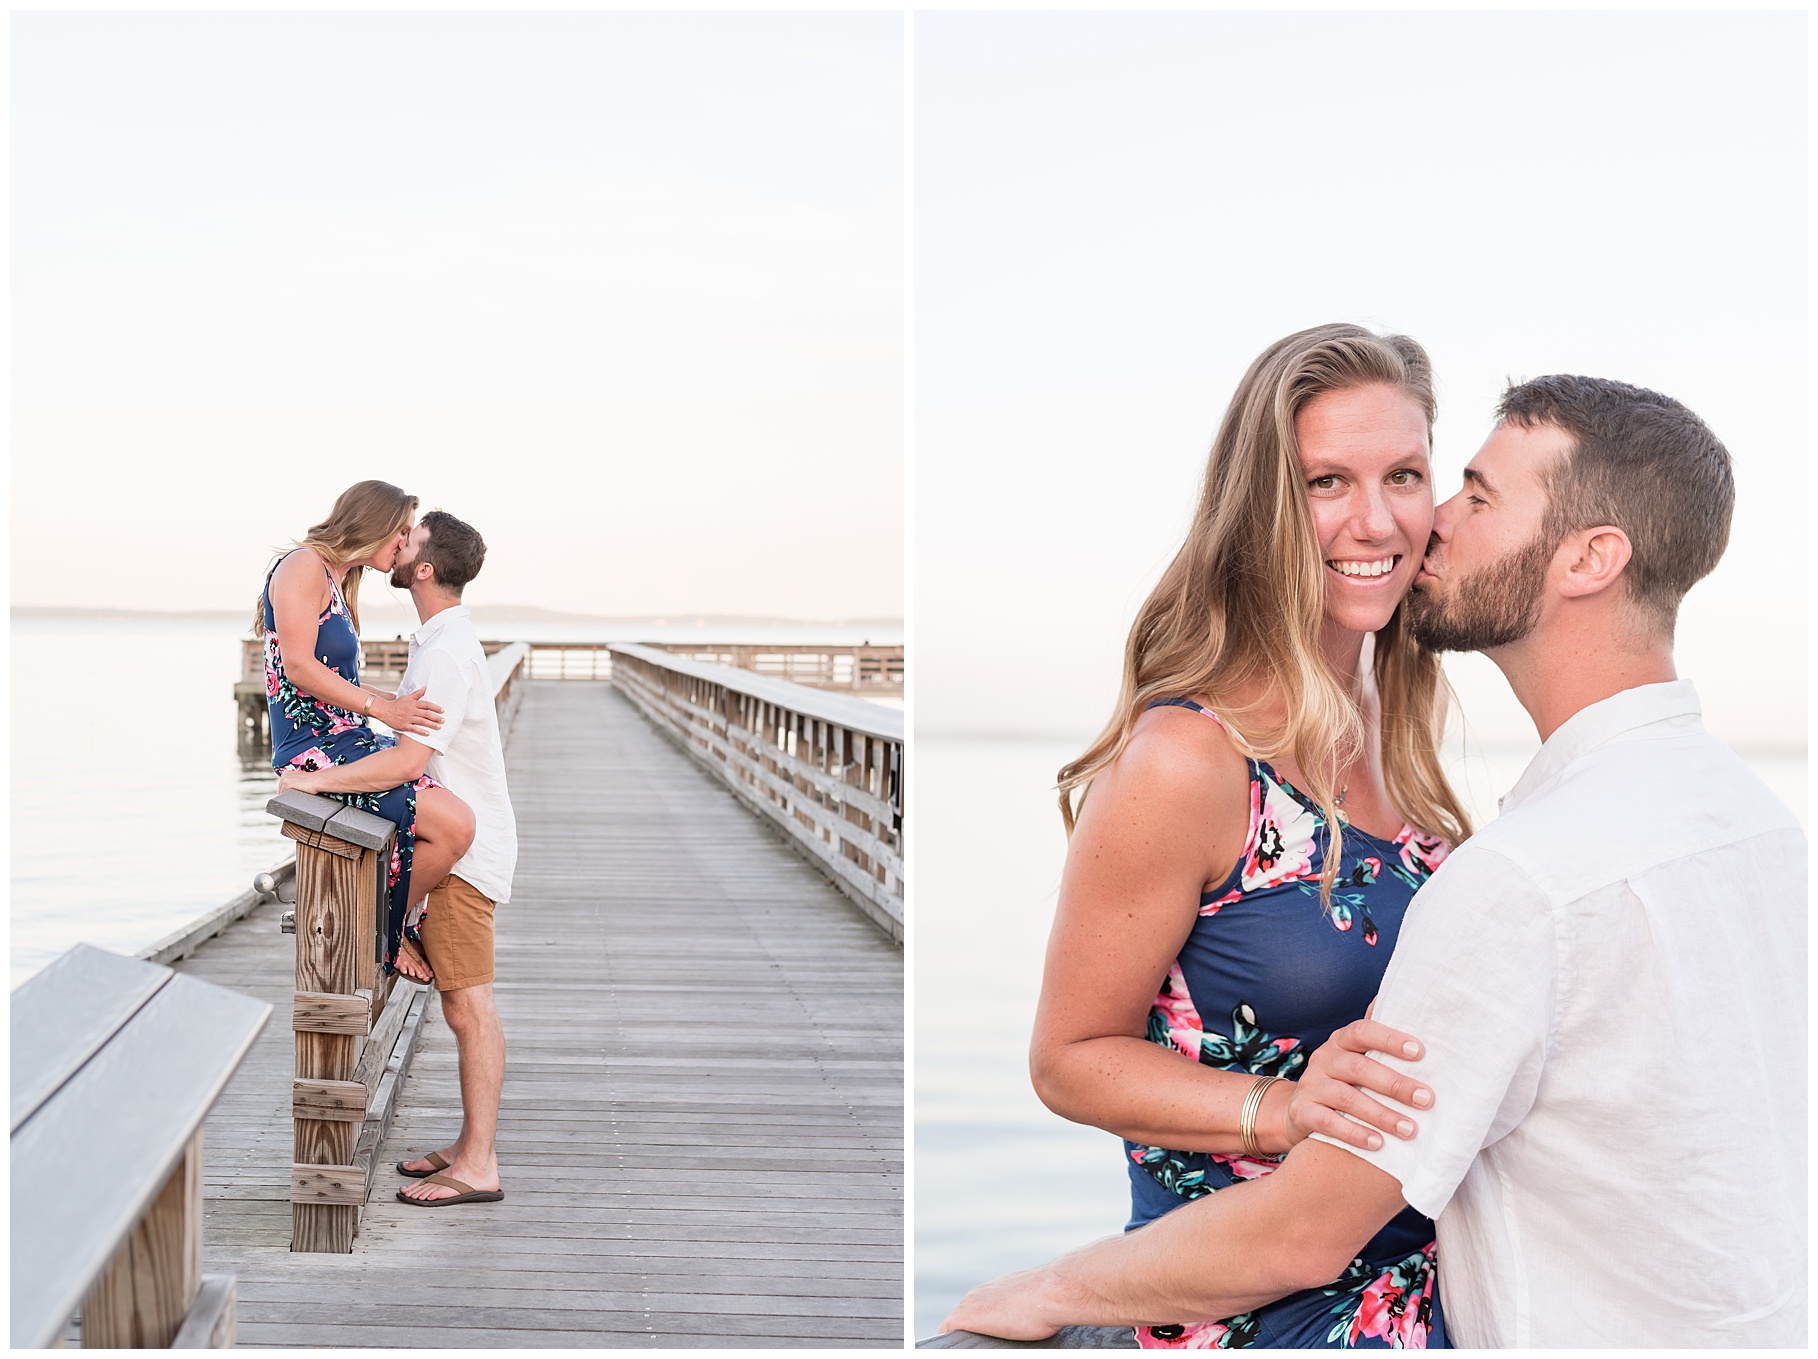 Couple Kissing on Dock Collage